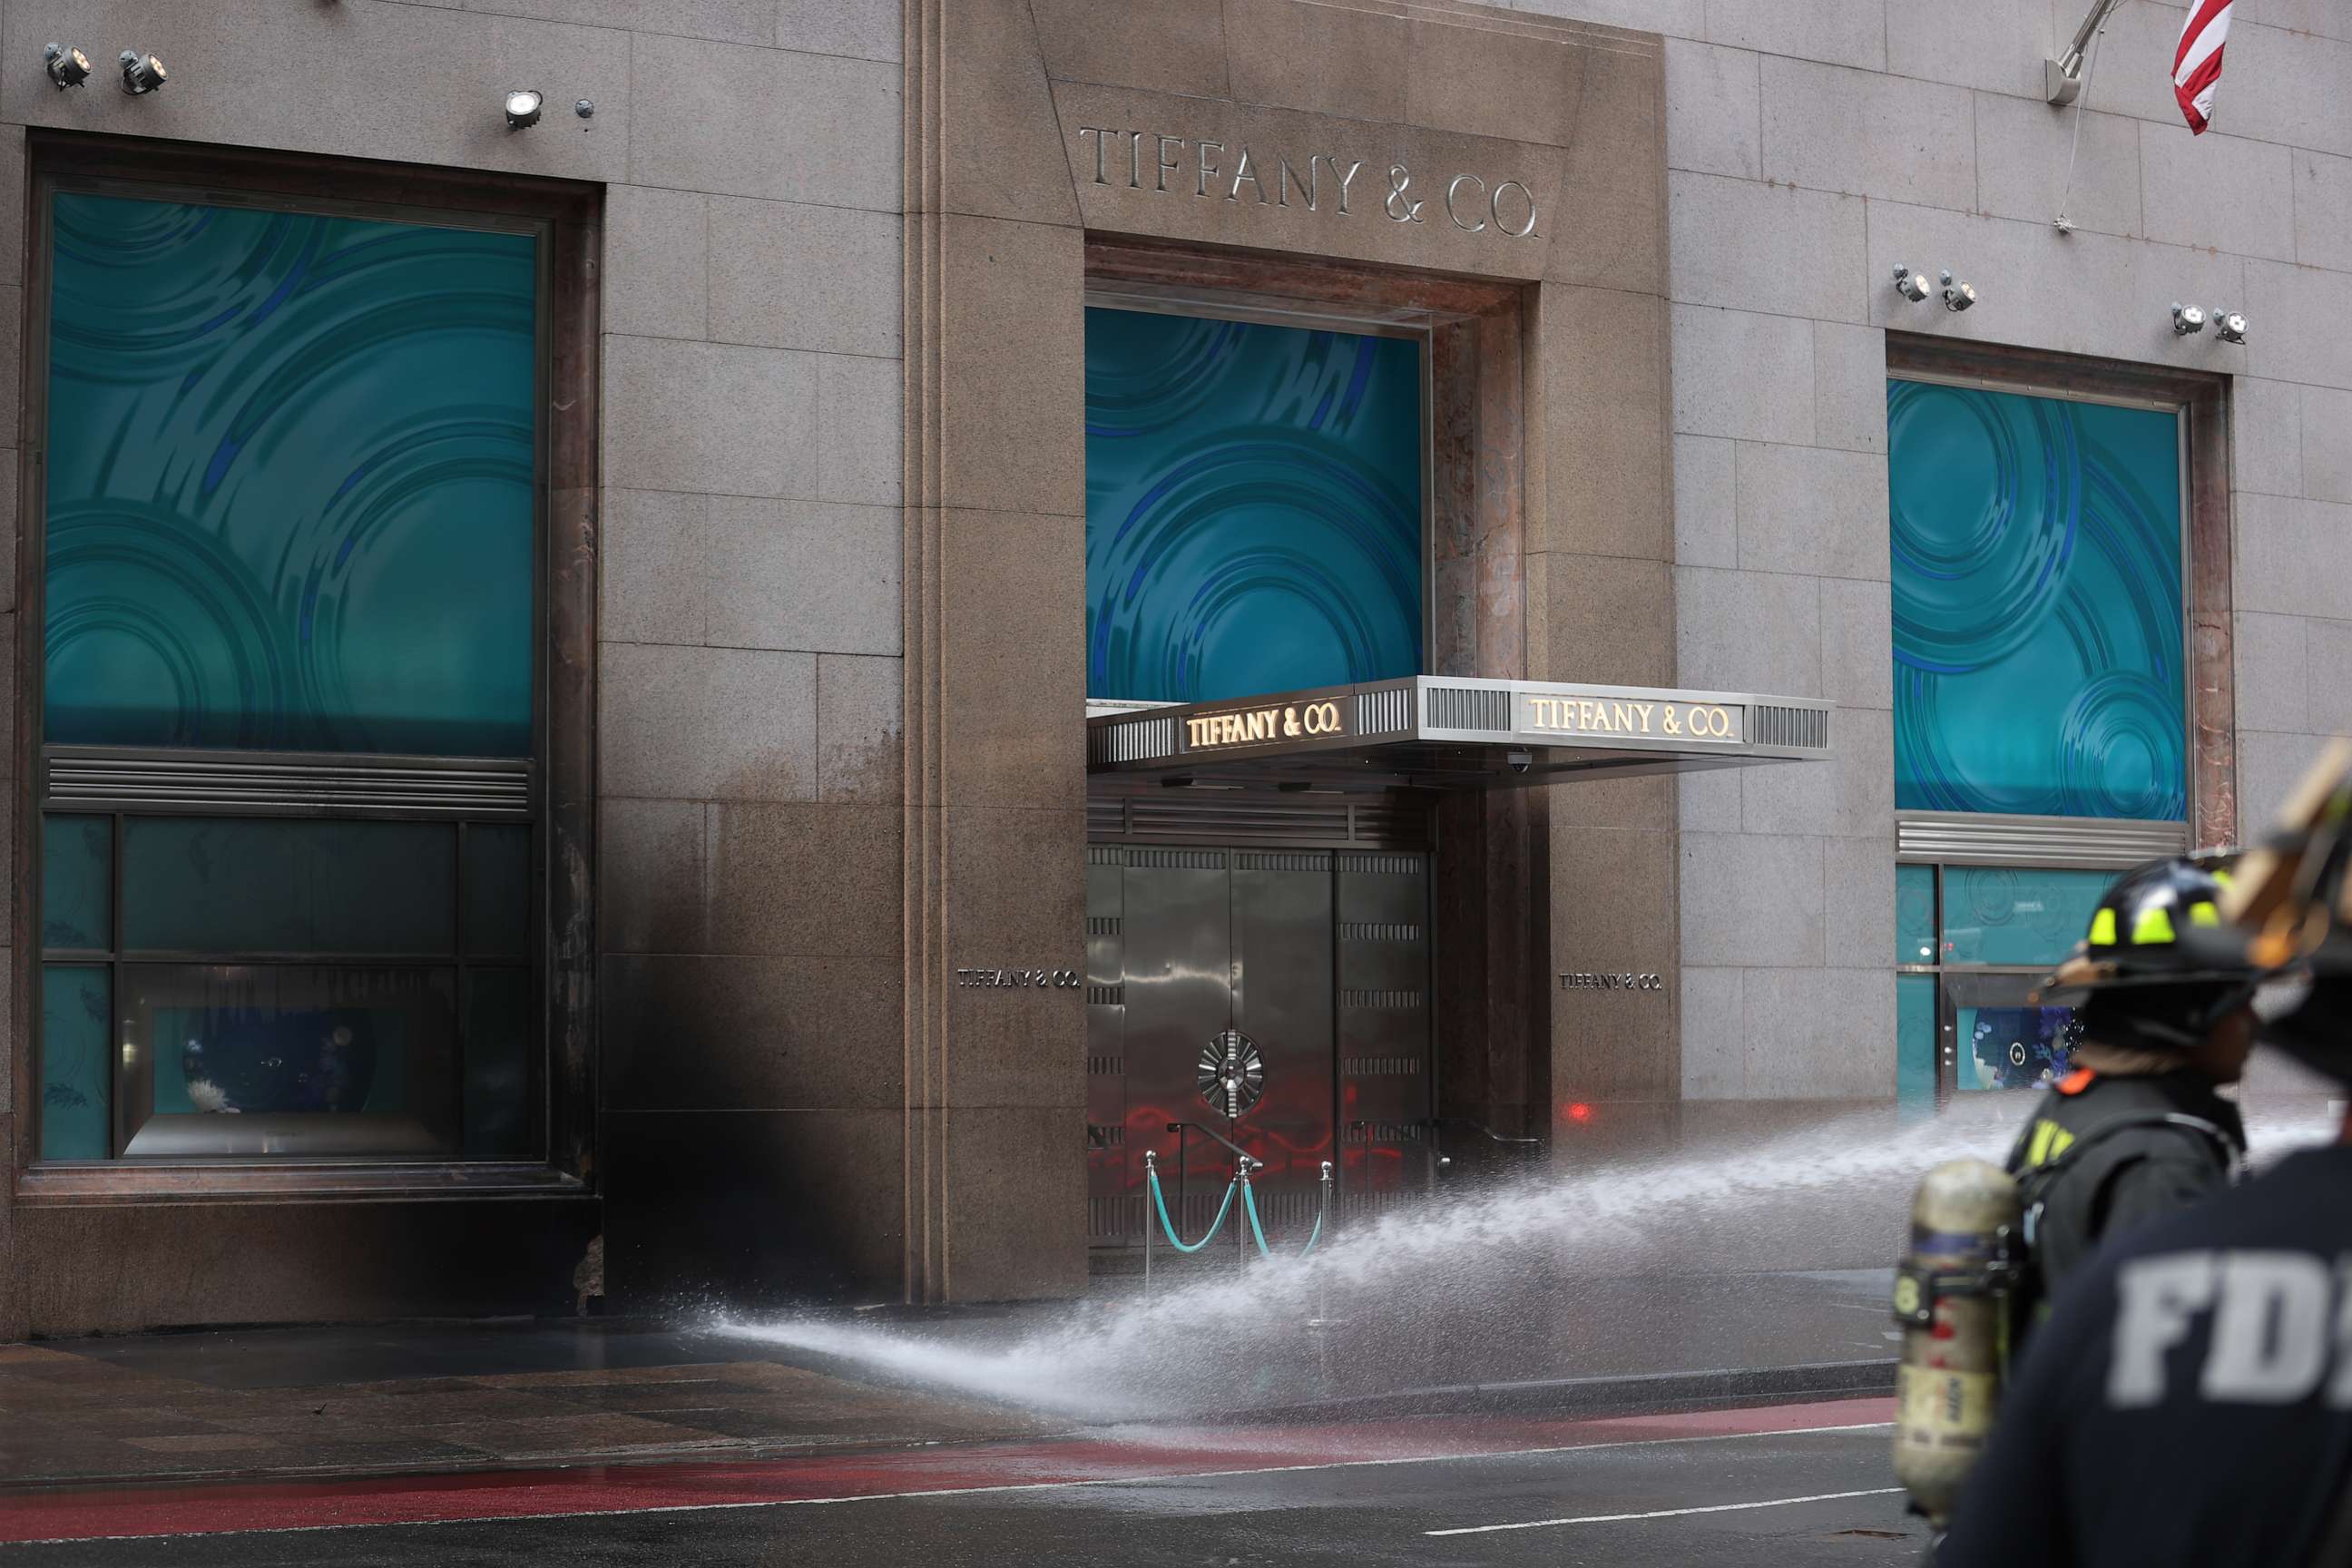 PHOTO: Firefighters in New York City have tackled a blaze at Tiffany & Co's iconic jewelry store in New York, on June 29, 2023.